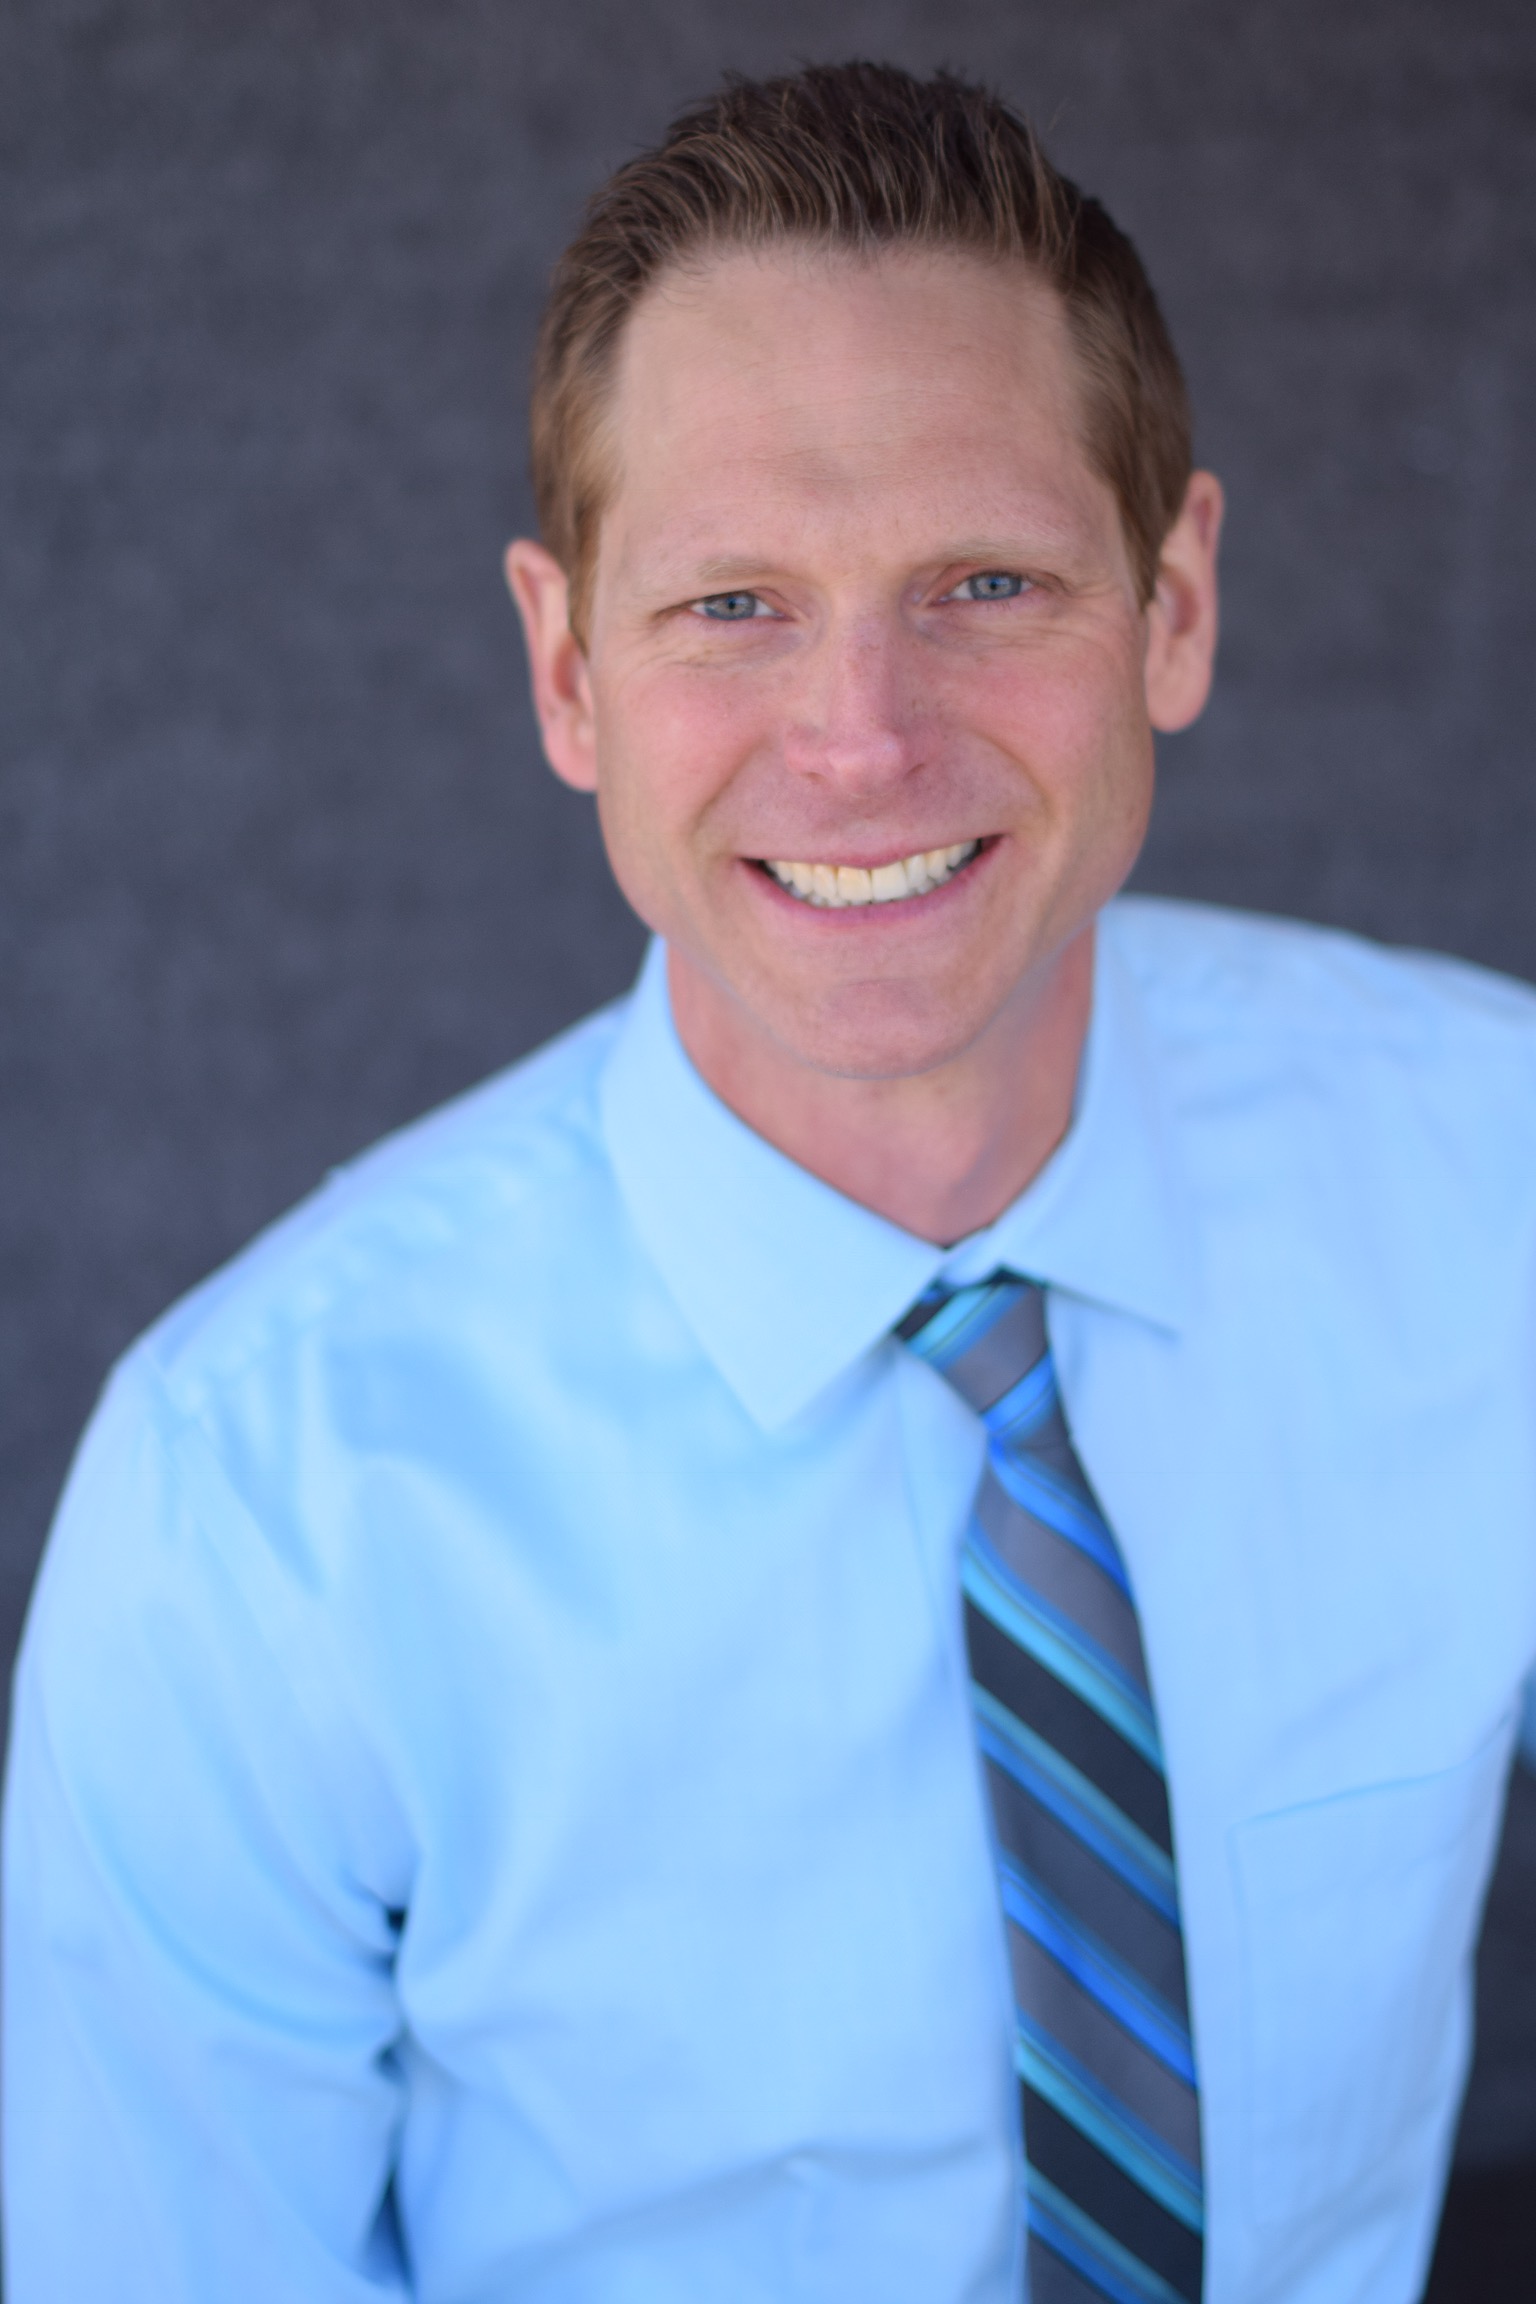 Dr. Kyle Anderson, Chiropractor serving Eau Claire and Chippewa Falls